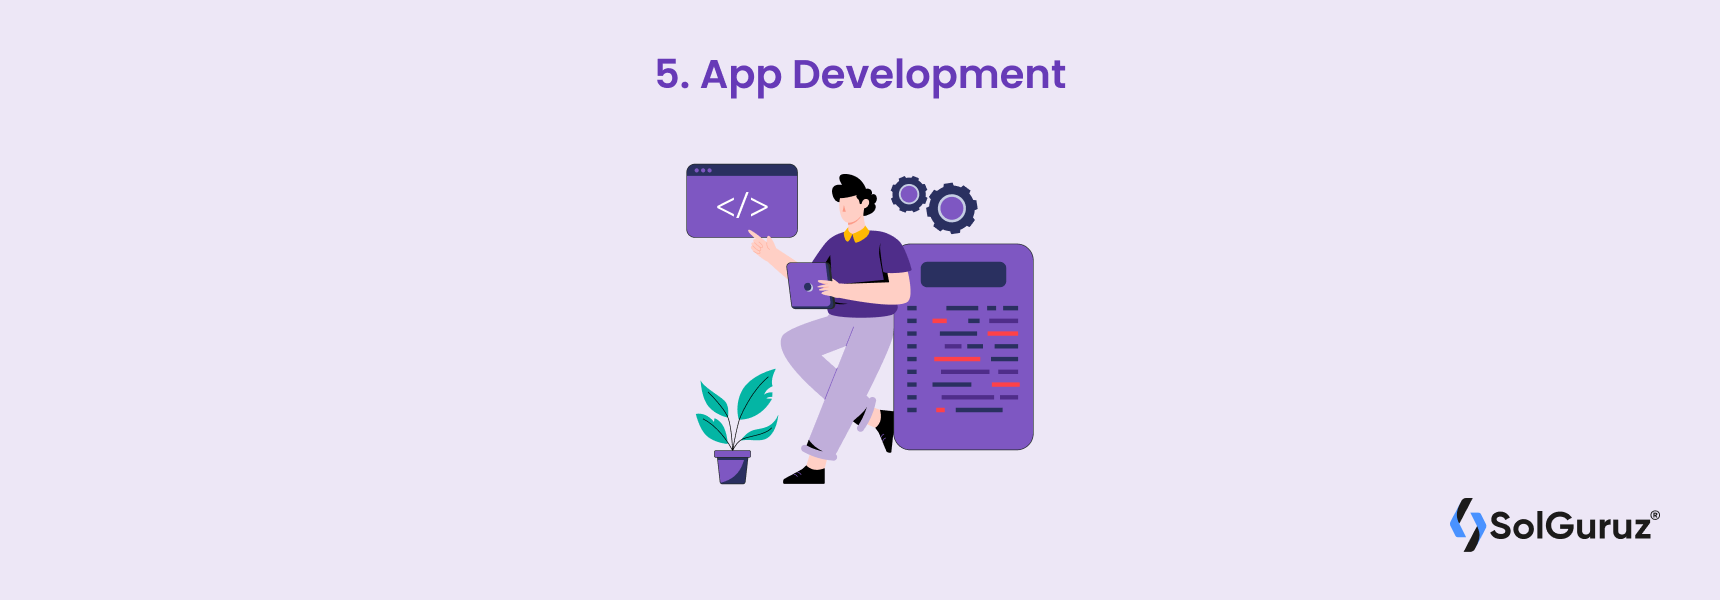 Application development includes defining the technical architecture, stack, and milestones.